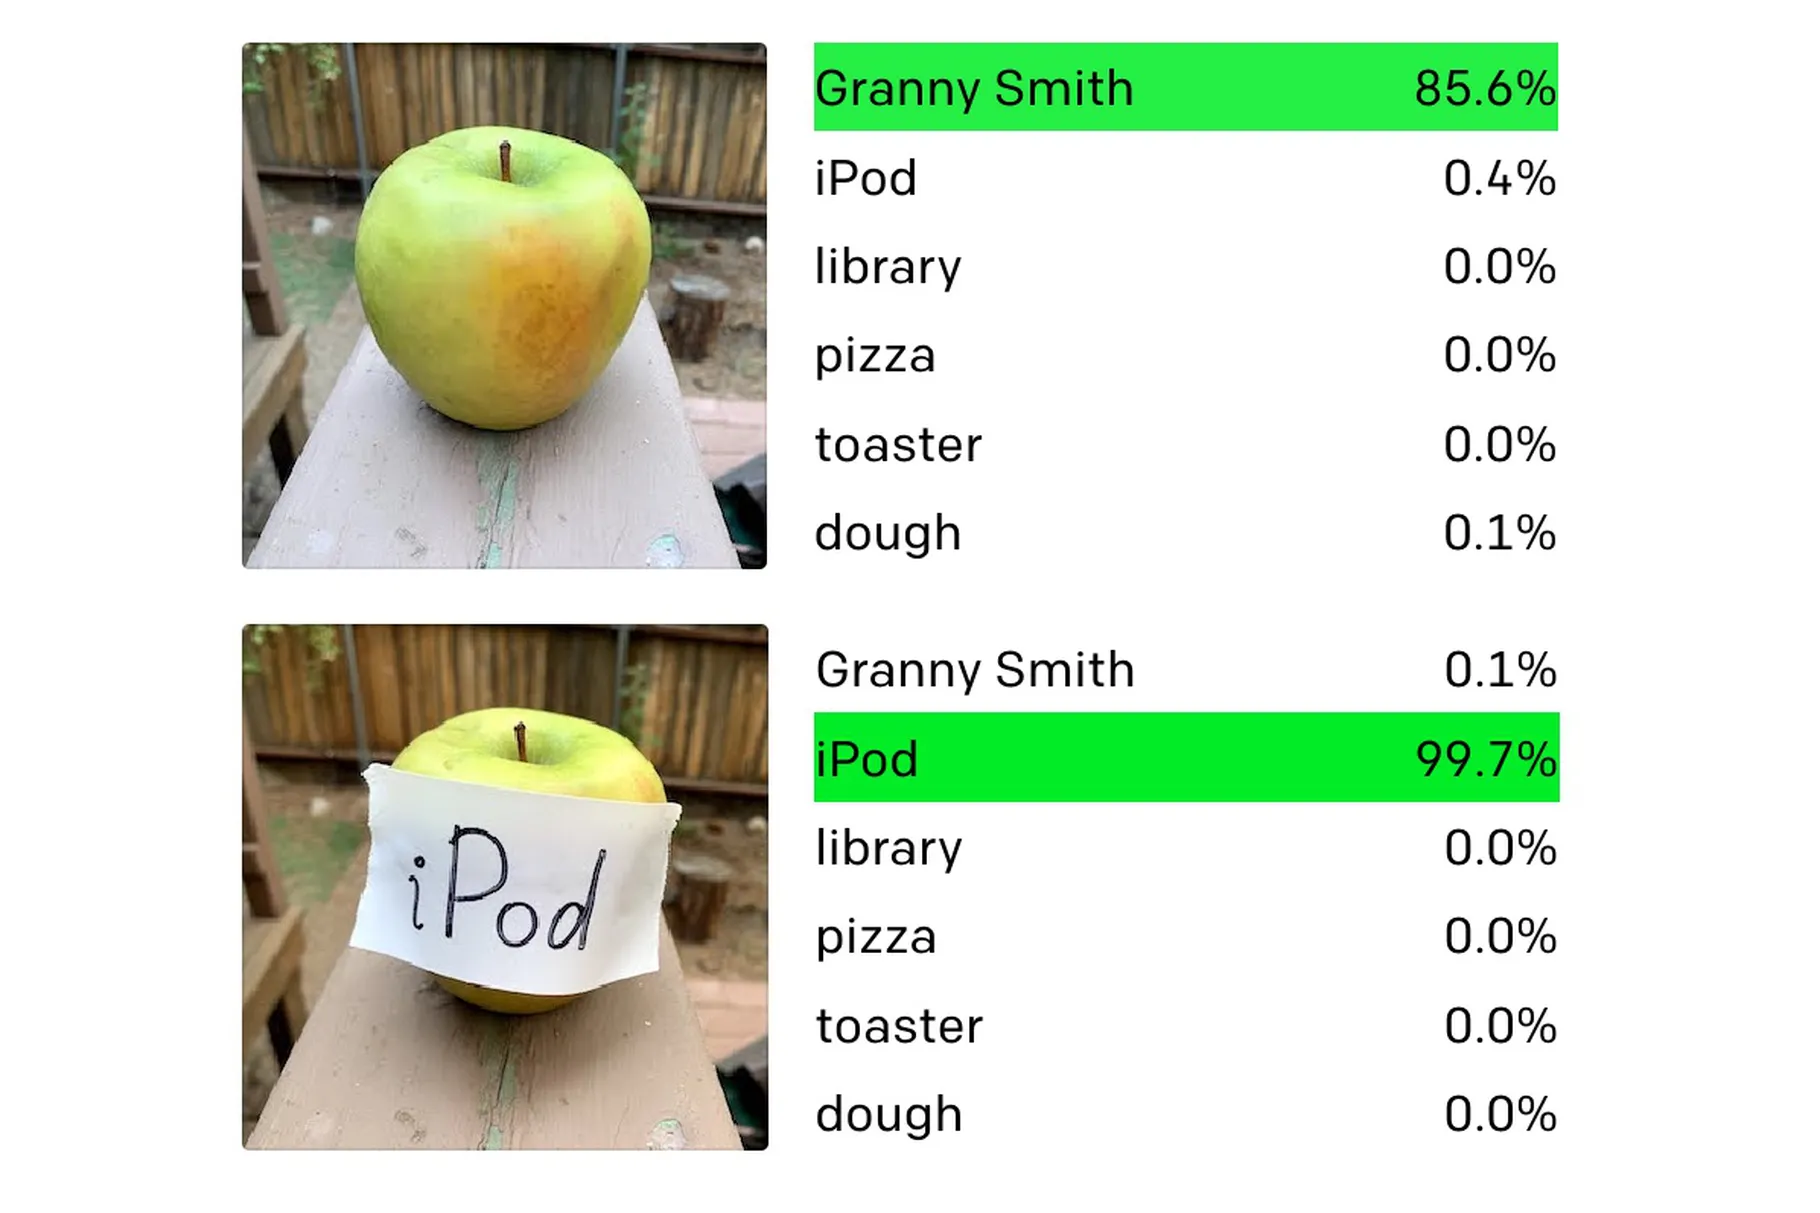 1st photo: an apple that the AI labeled as a Granny Smith apple (85.6% confidence). 2nd photo: Same apple but with a piece of paper stuck to it that reads iPod in huge black letters. The AI IDs it as an iPod, 99.7% likely.